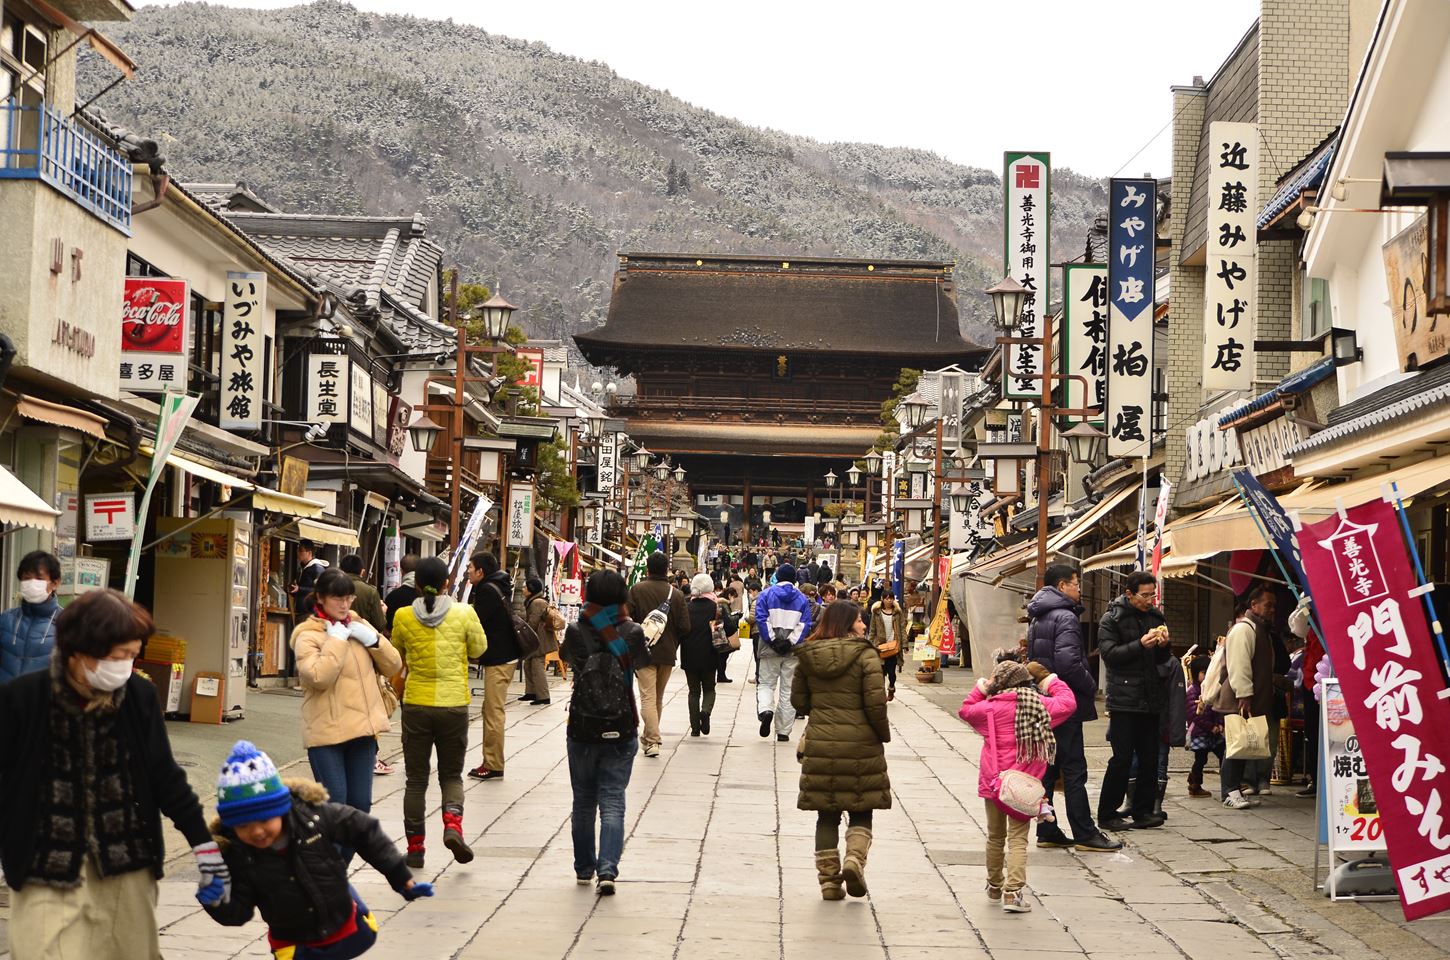 Sightseeing scenery that simply shows the weather in Nagano in February6